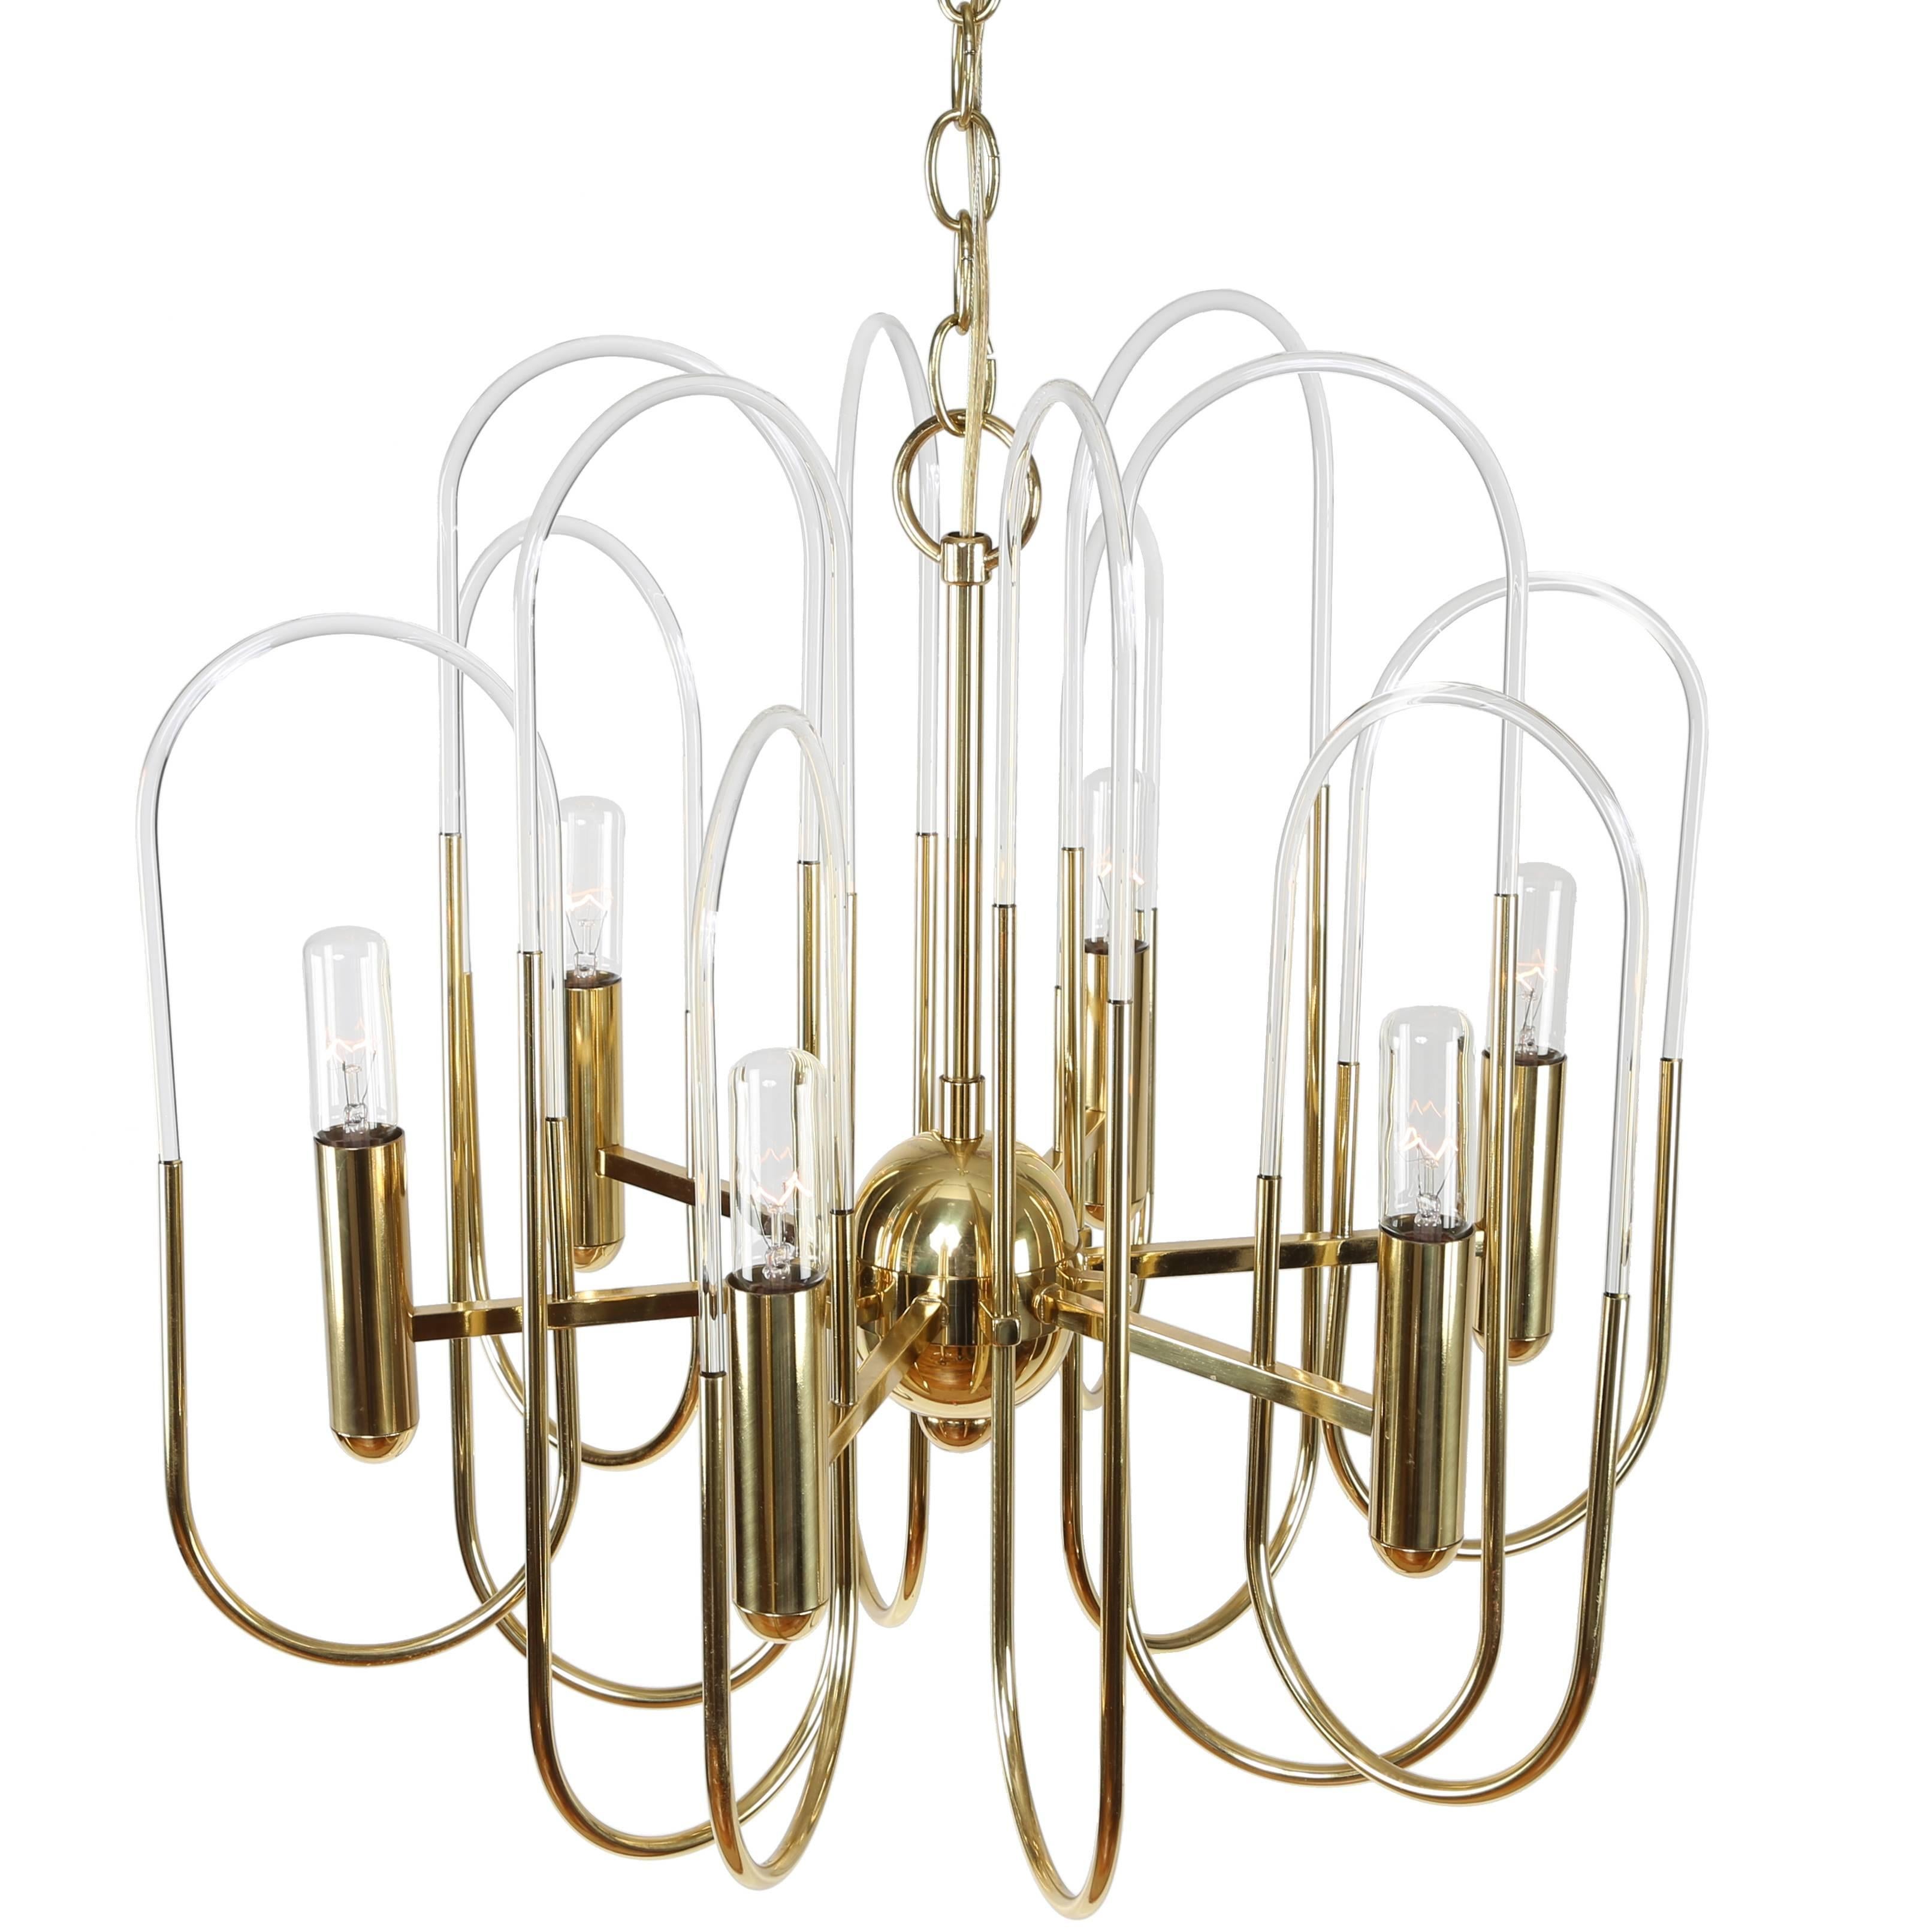 Enrico Profili Brass and Glass Loop Chandelier, Circa 1960s For Sale